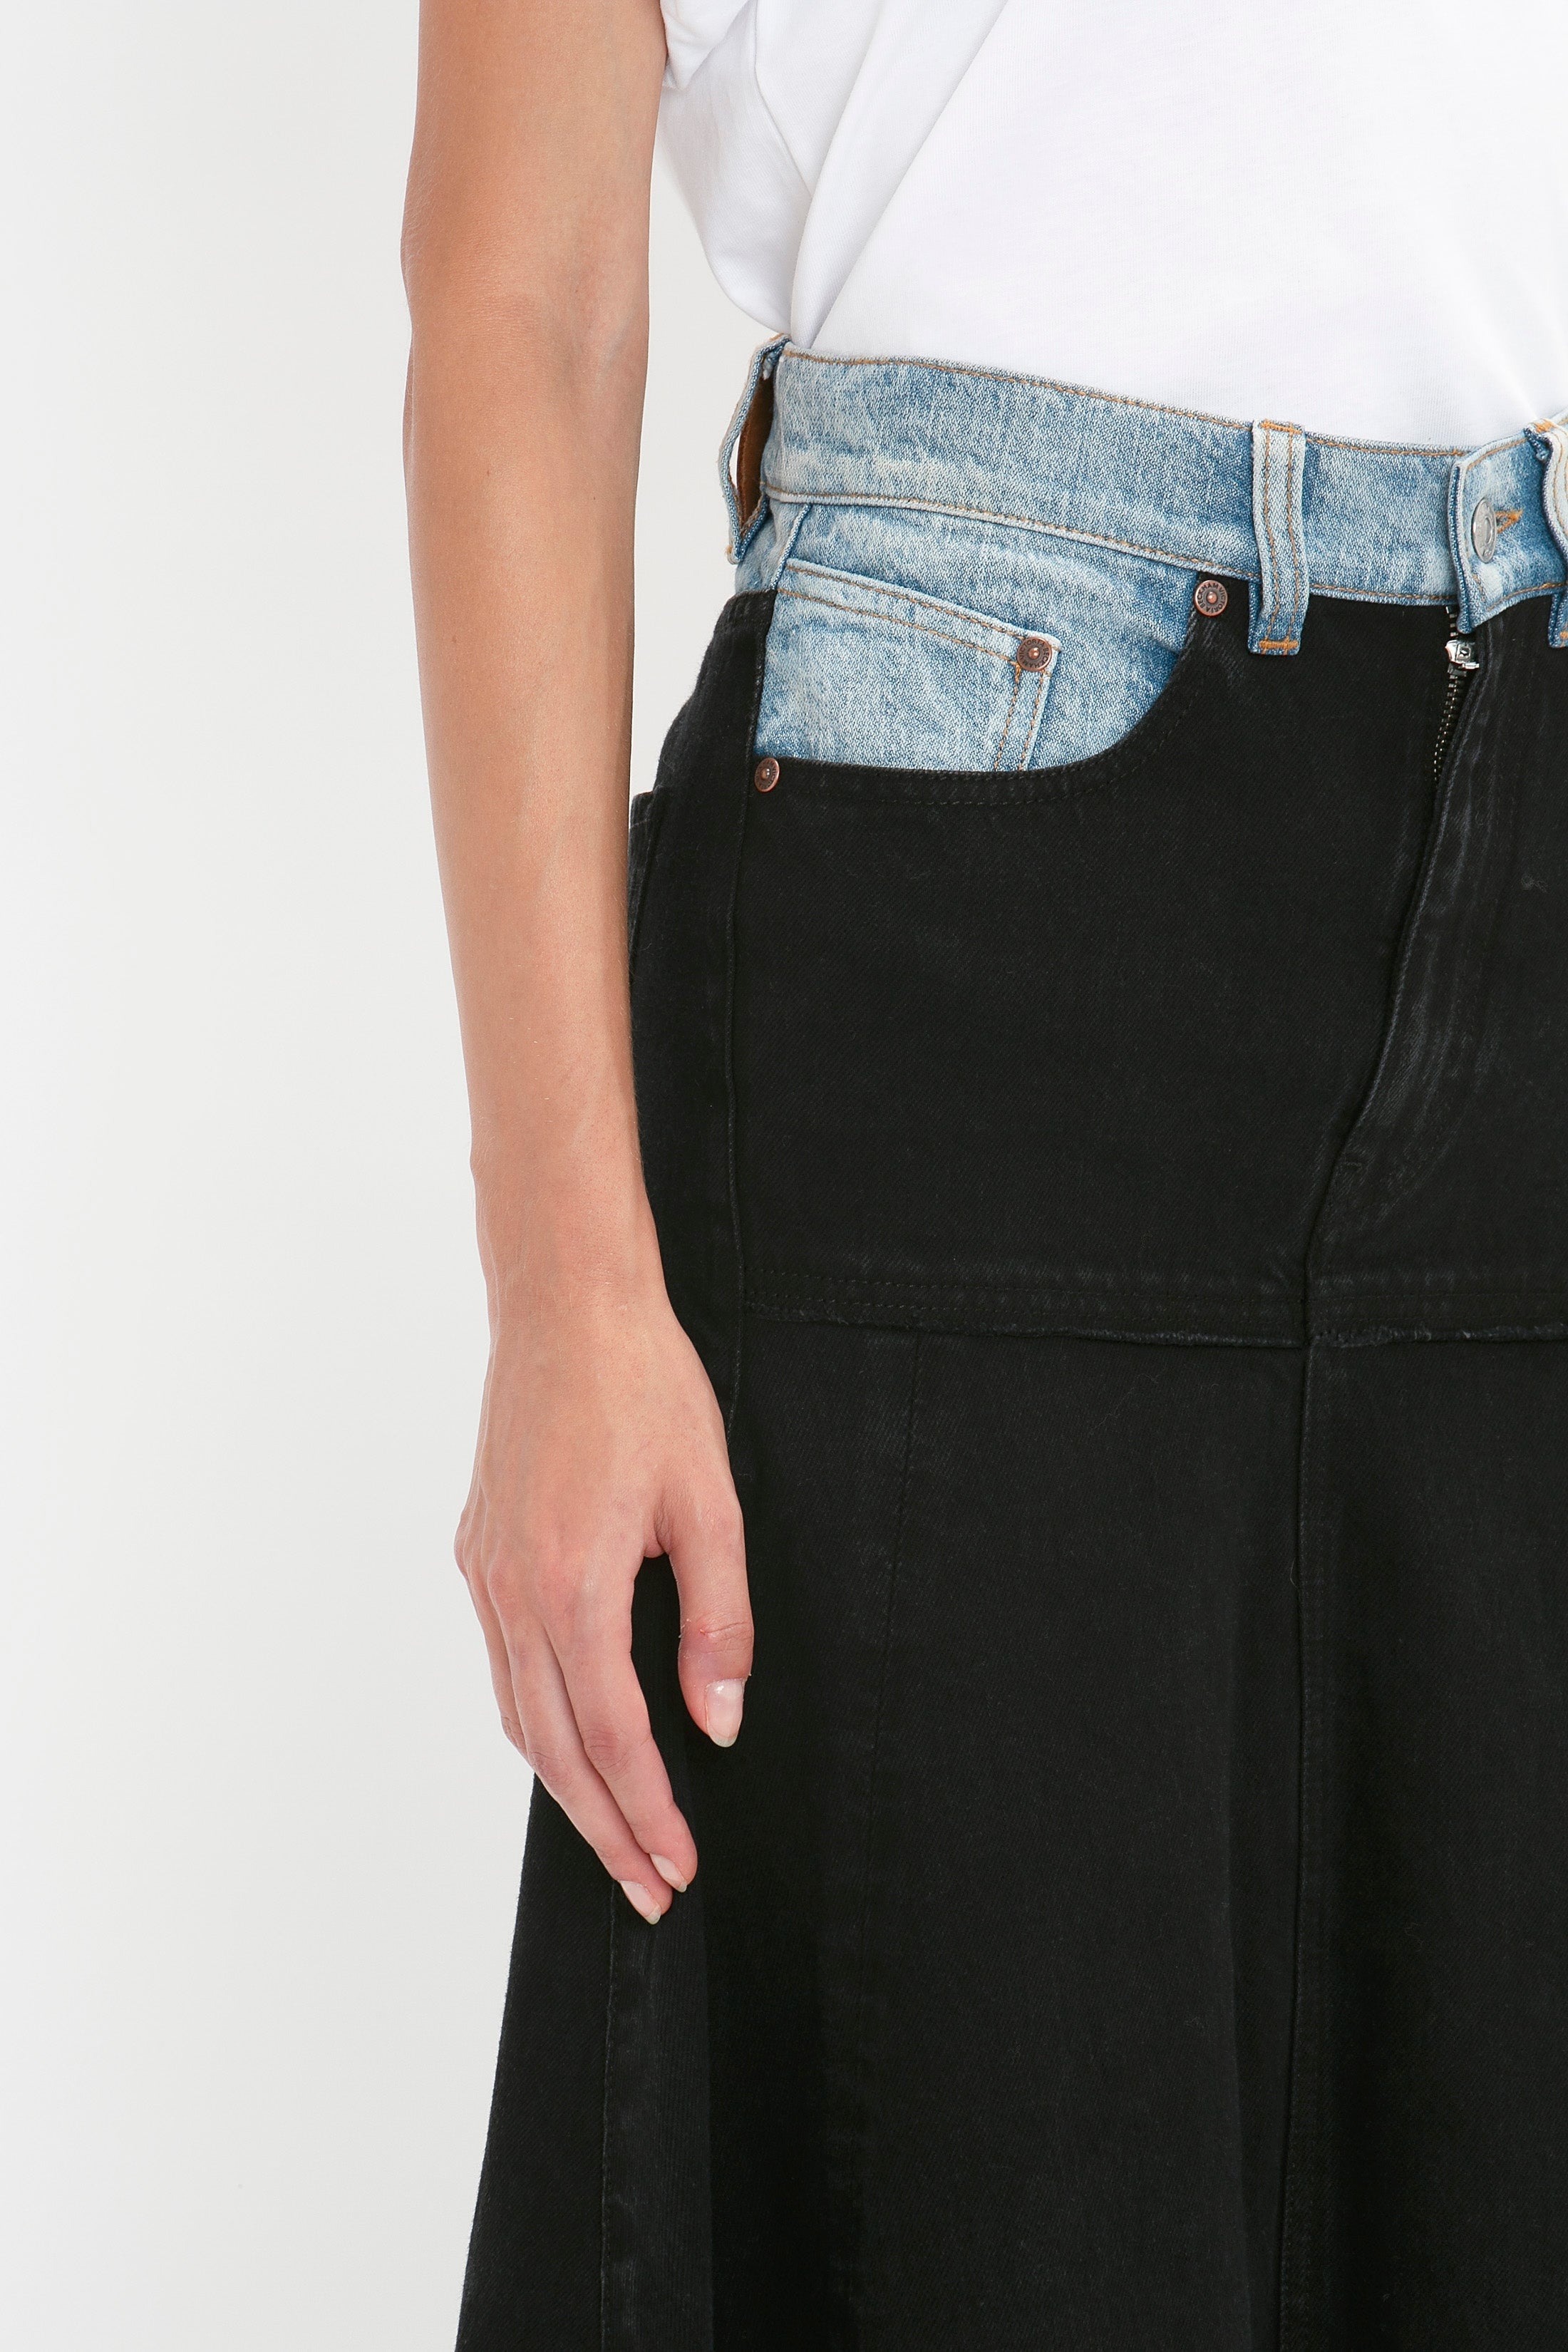 Patched Denim Skirt In Contrast Wash - 5